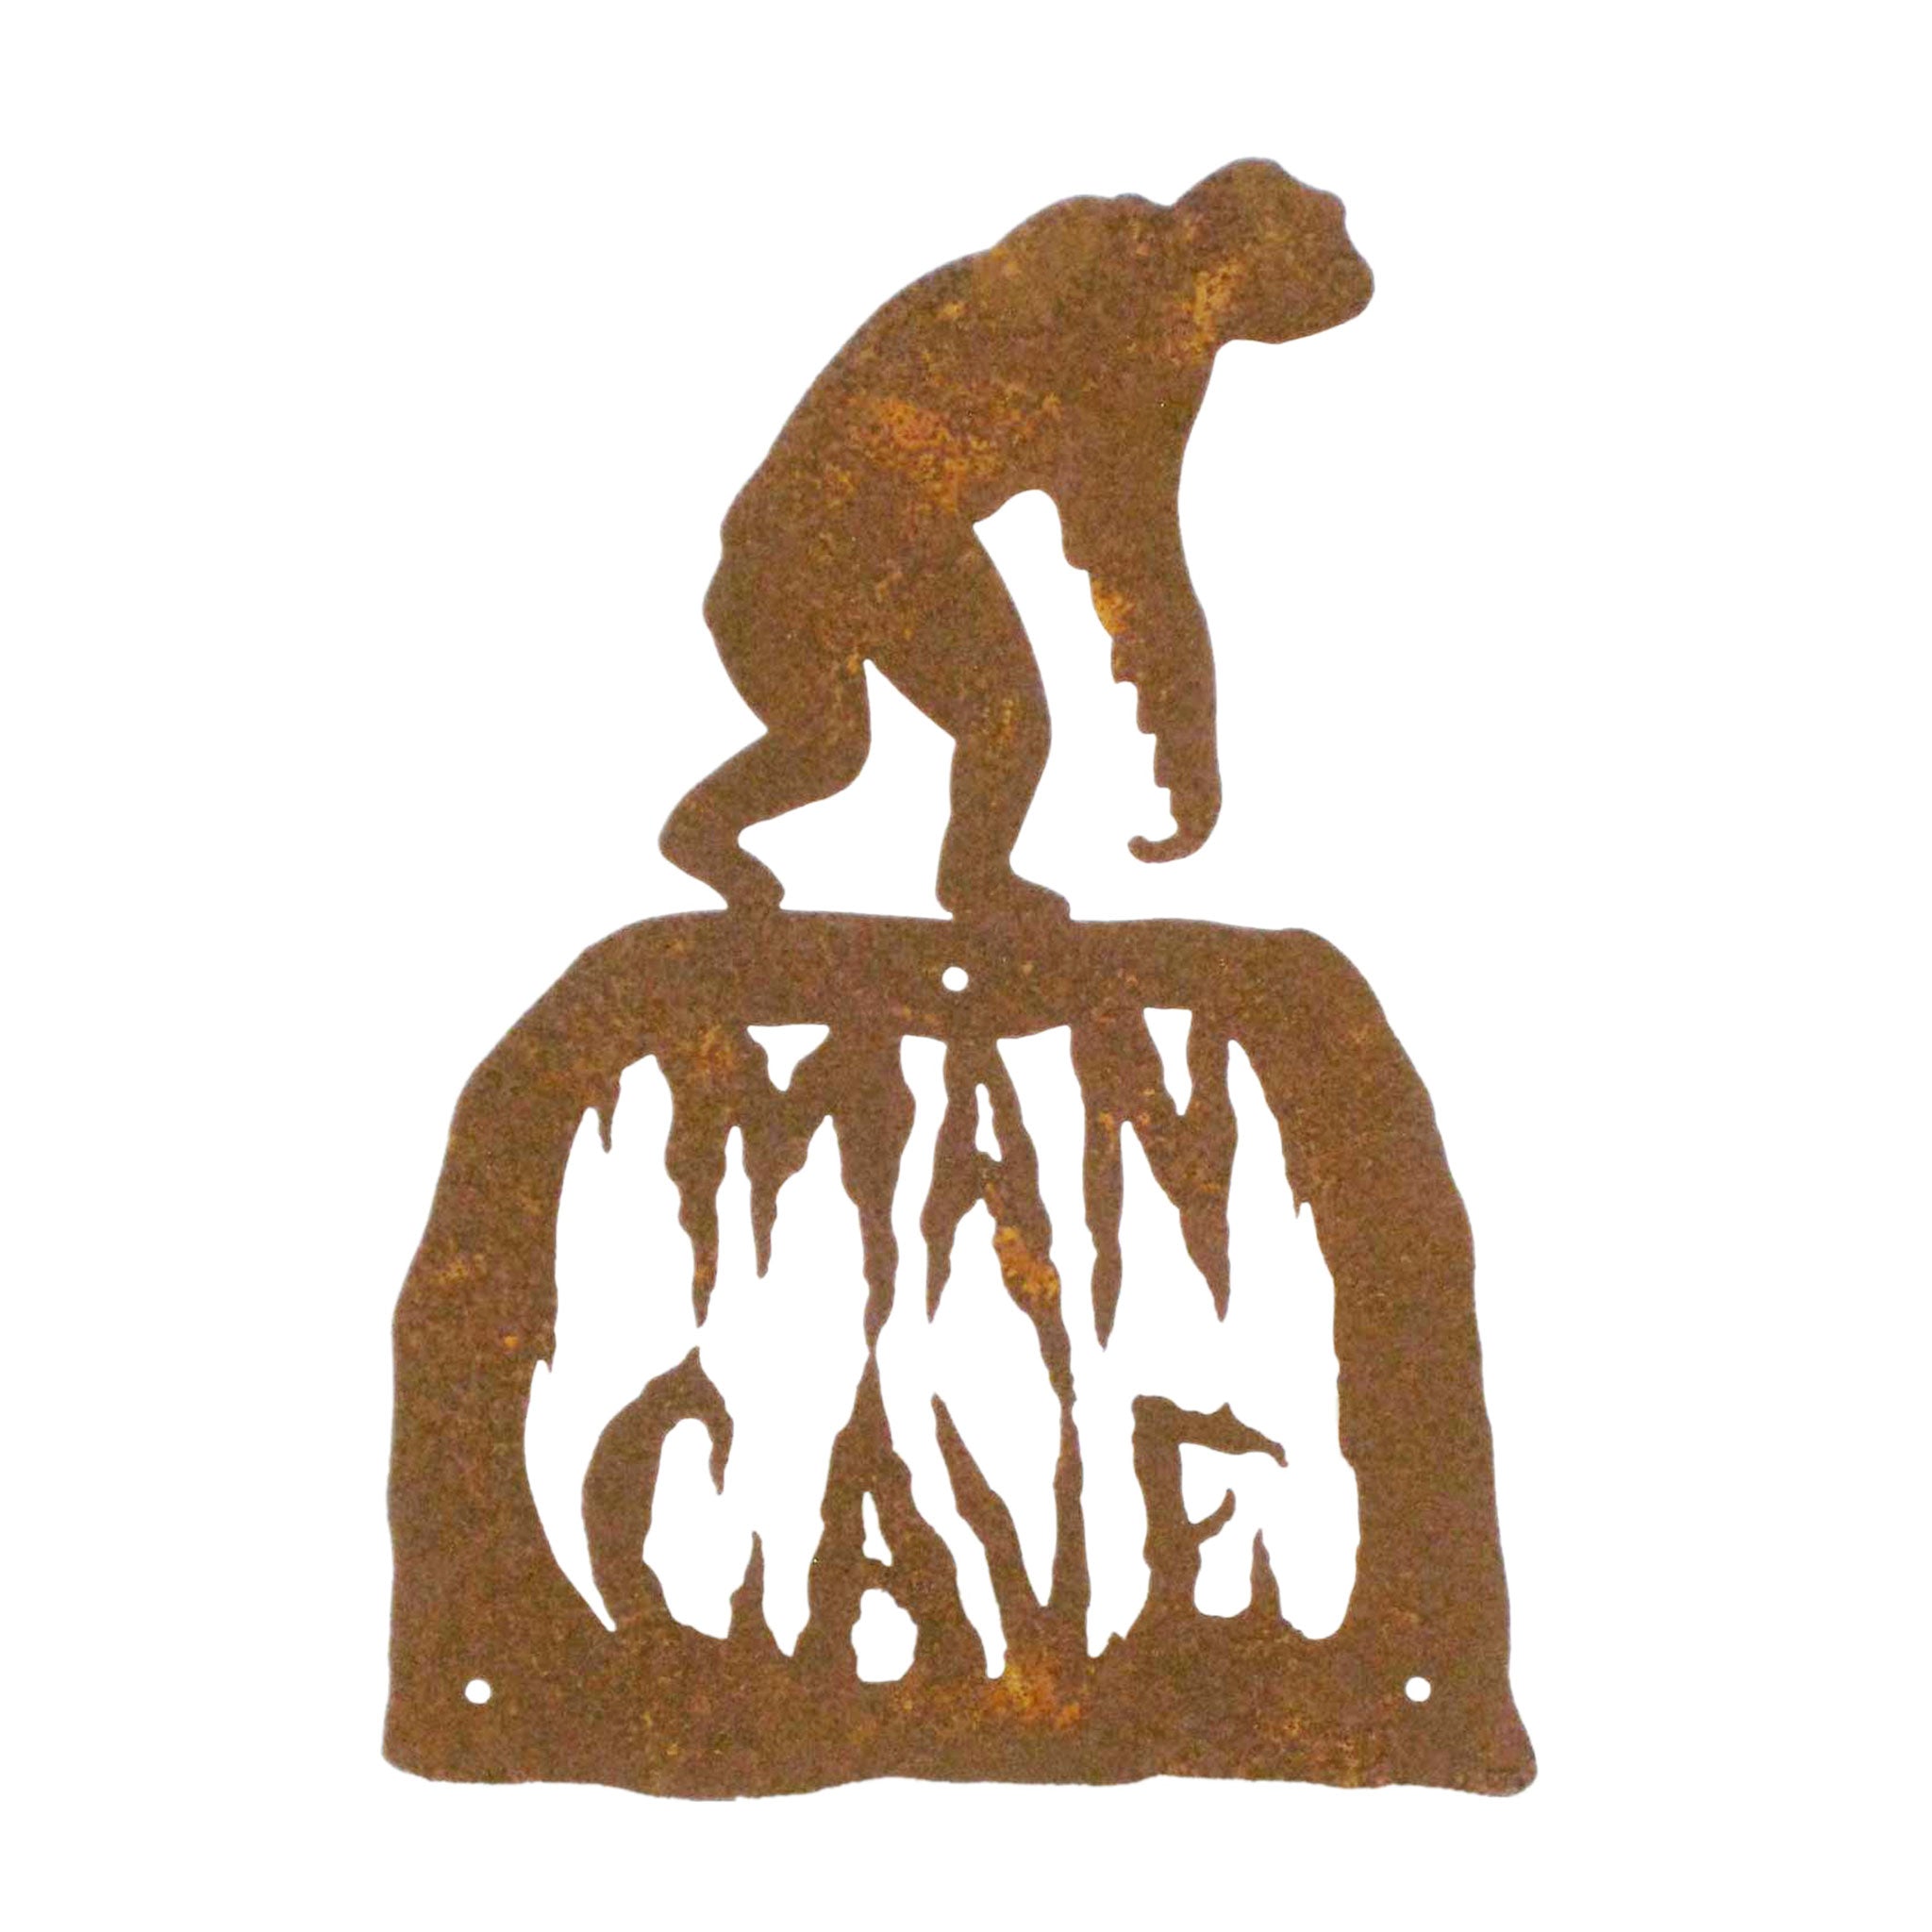 Man Cave Wall Mount Sign